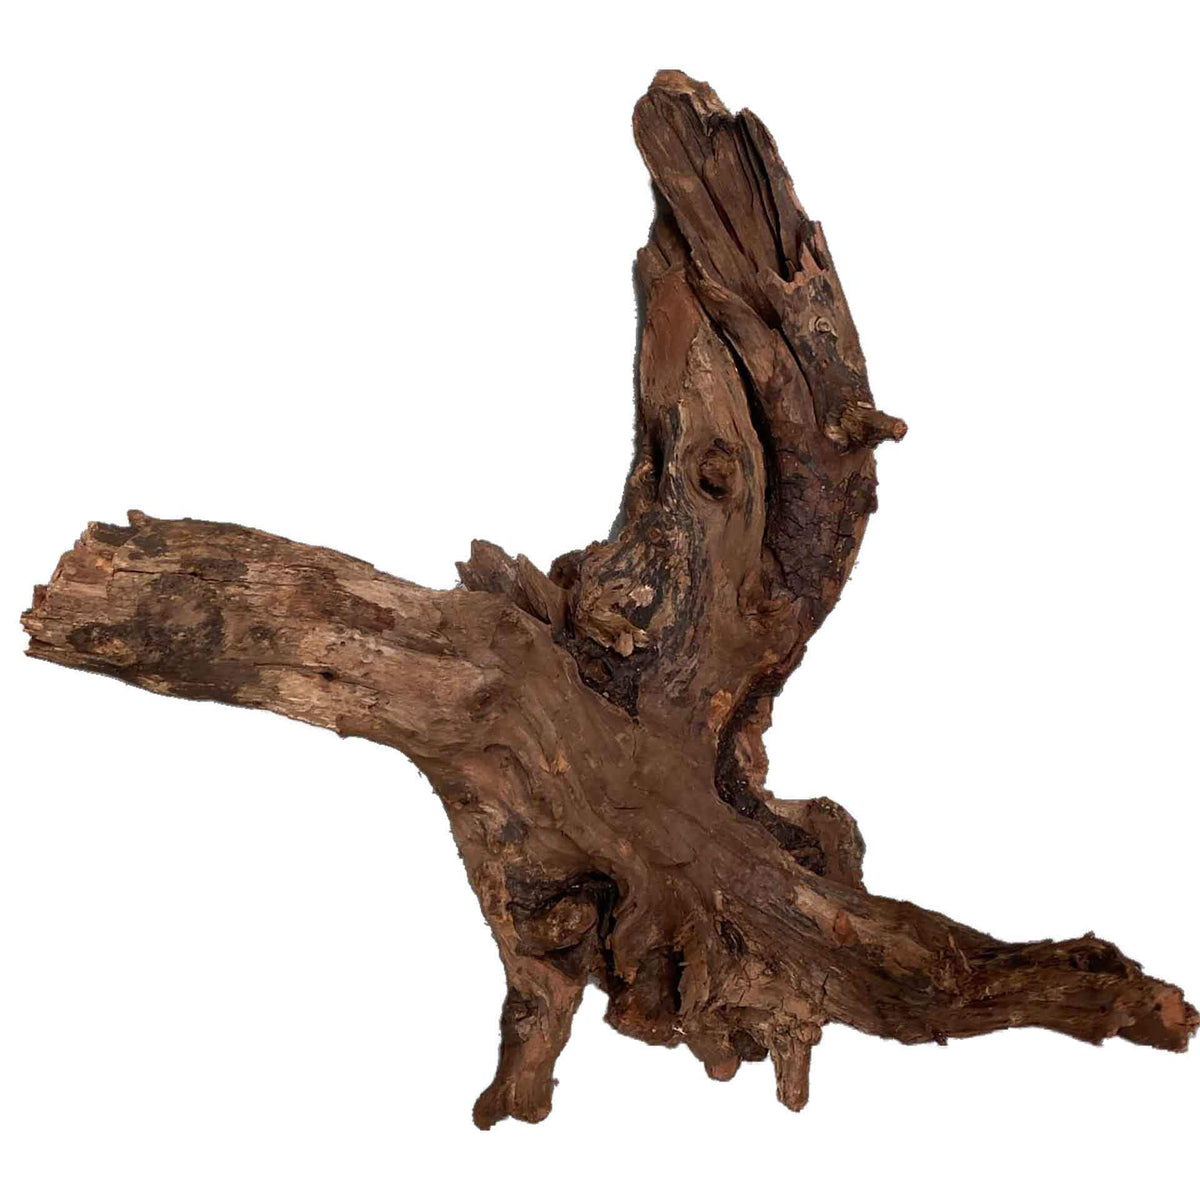 Dymax Driftwood Medium - In Store Pick Up Only